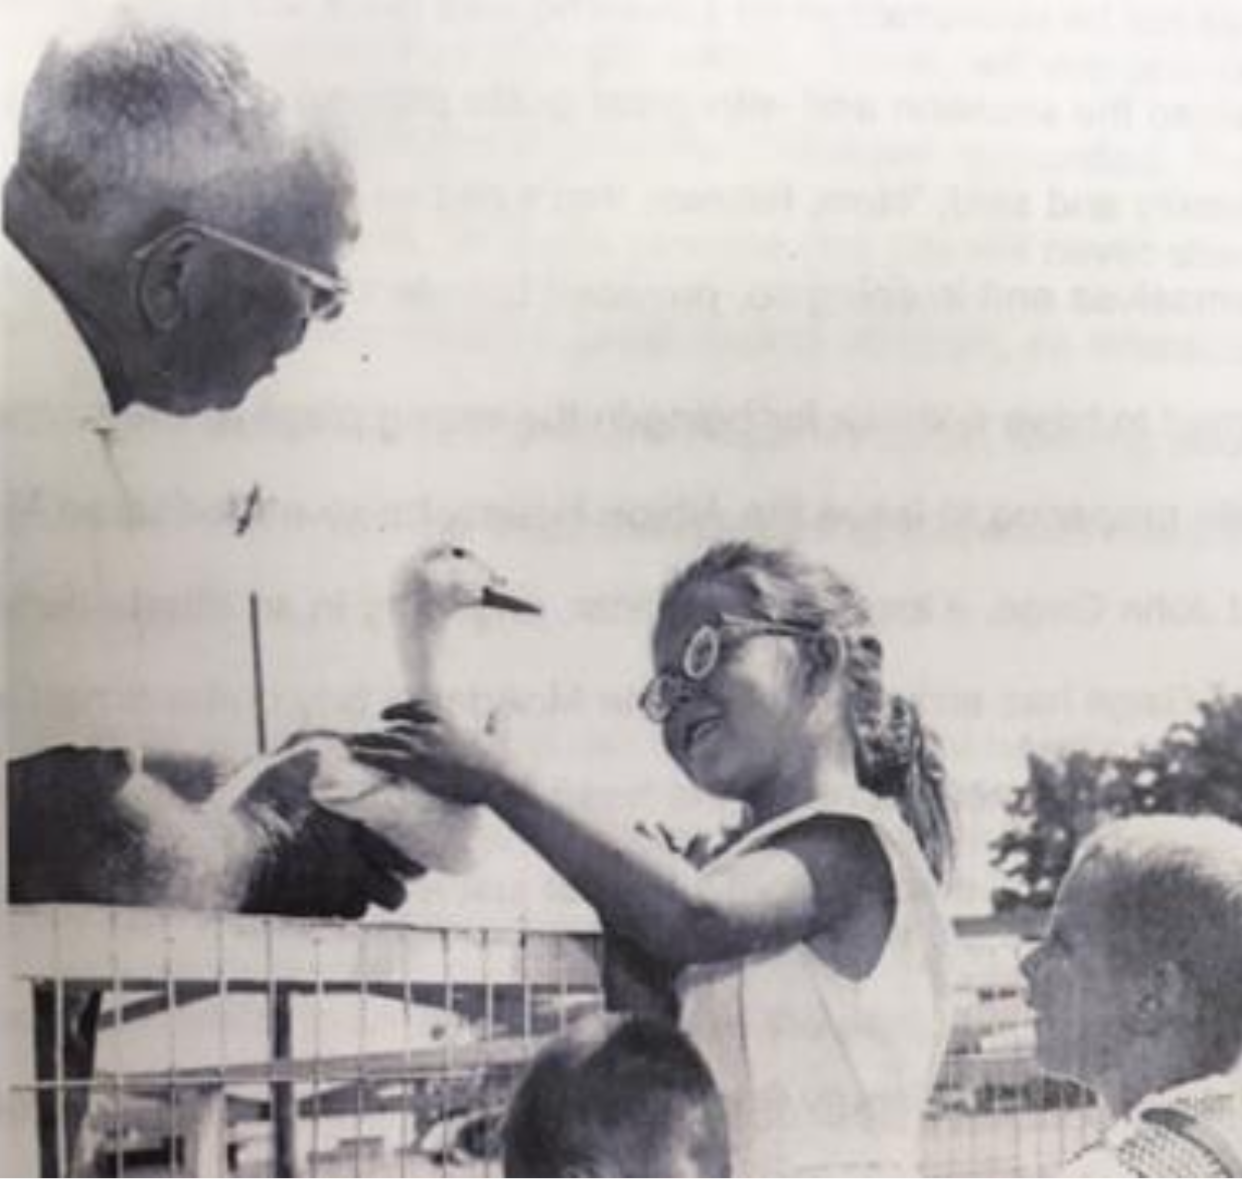 Christmas Park had several petting zoos showcasing various wild animals. Howard, pictured here, was one of the main attractions. (Albion archives) 